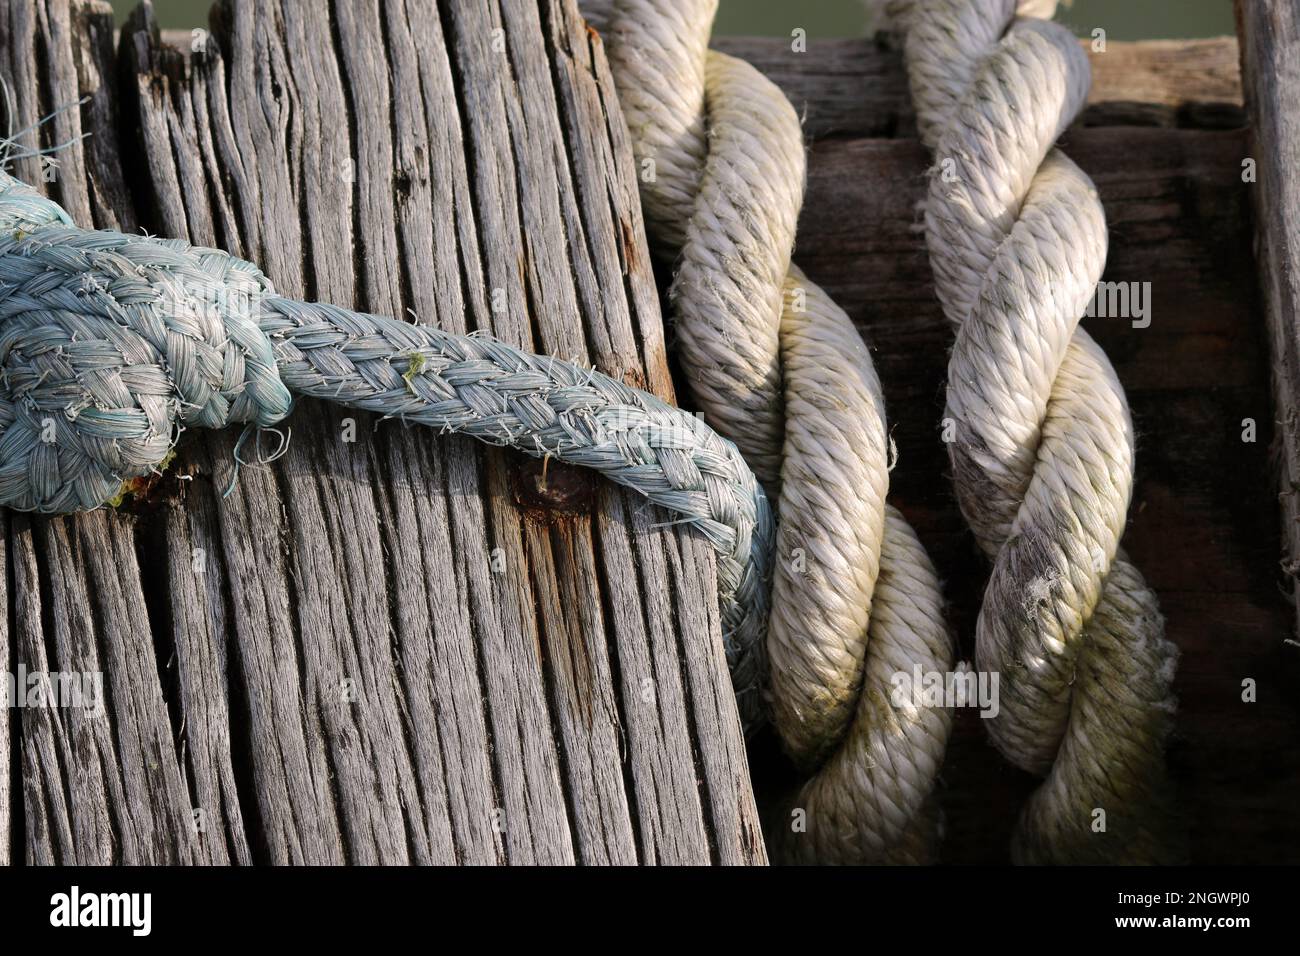 At the berths, time passes through the threads of the ropes, also called moorings. Stock Photo